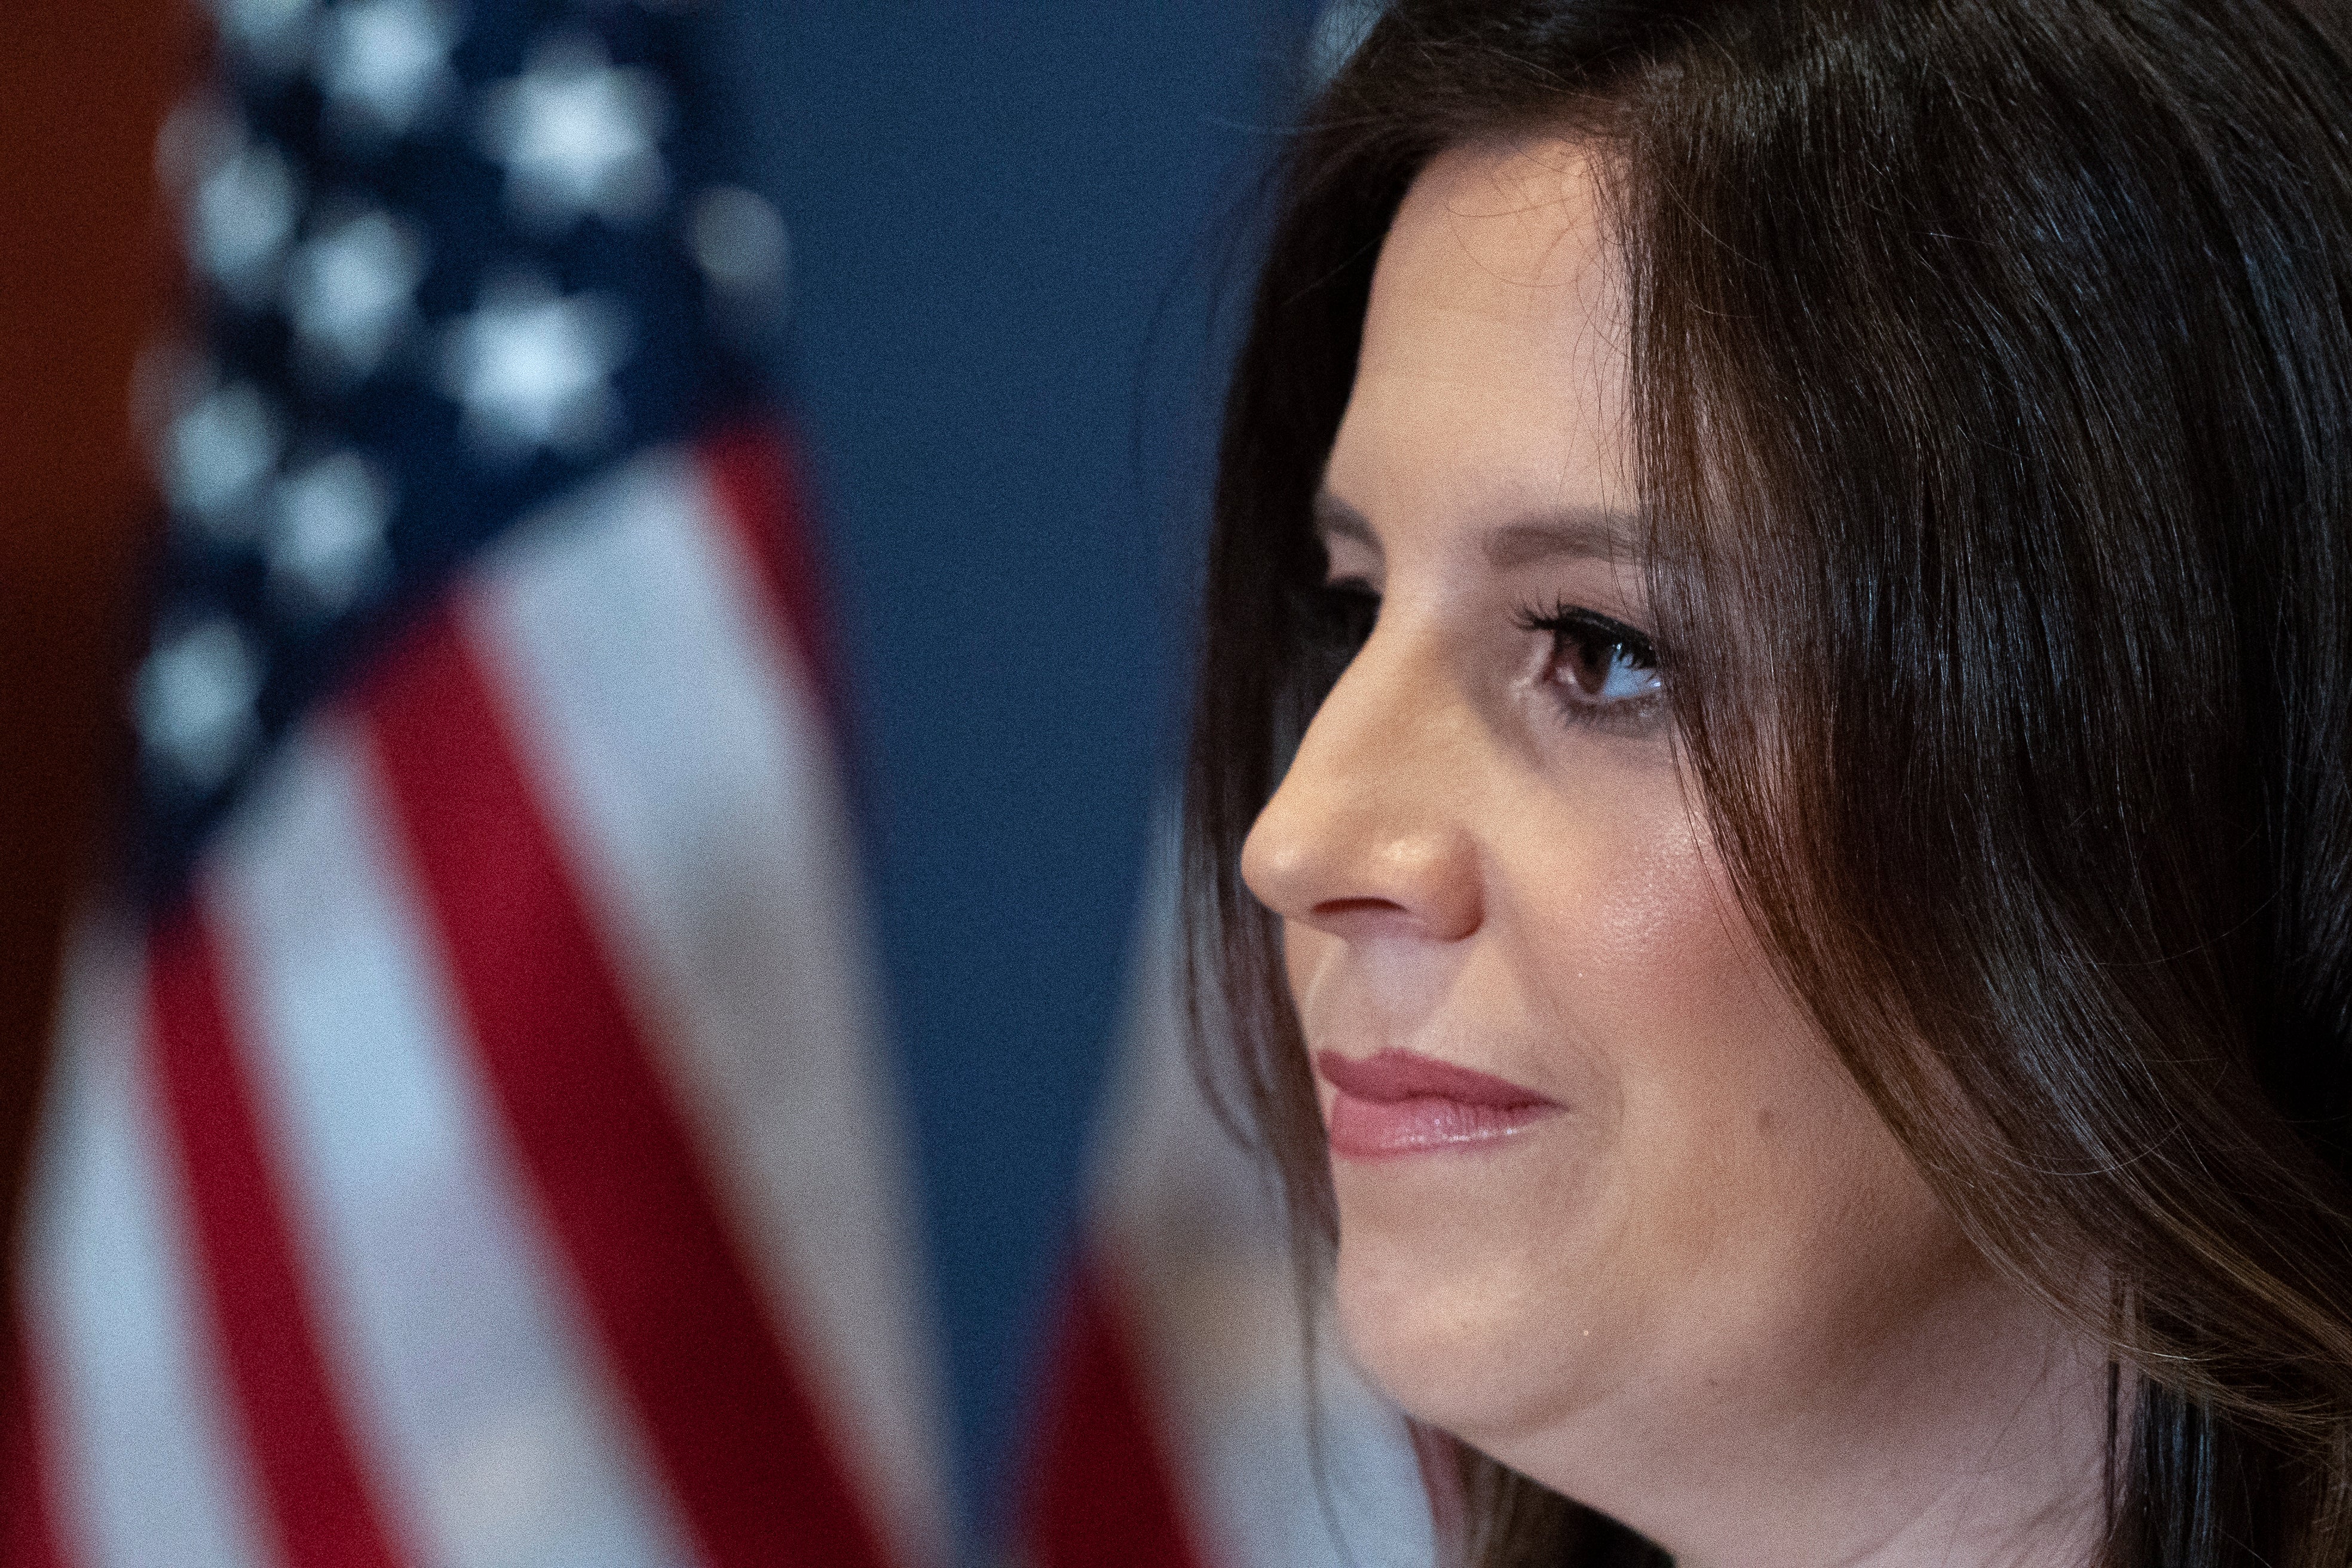 Elise Stefanik took issue with baby formula being sent to the southern border